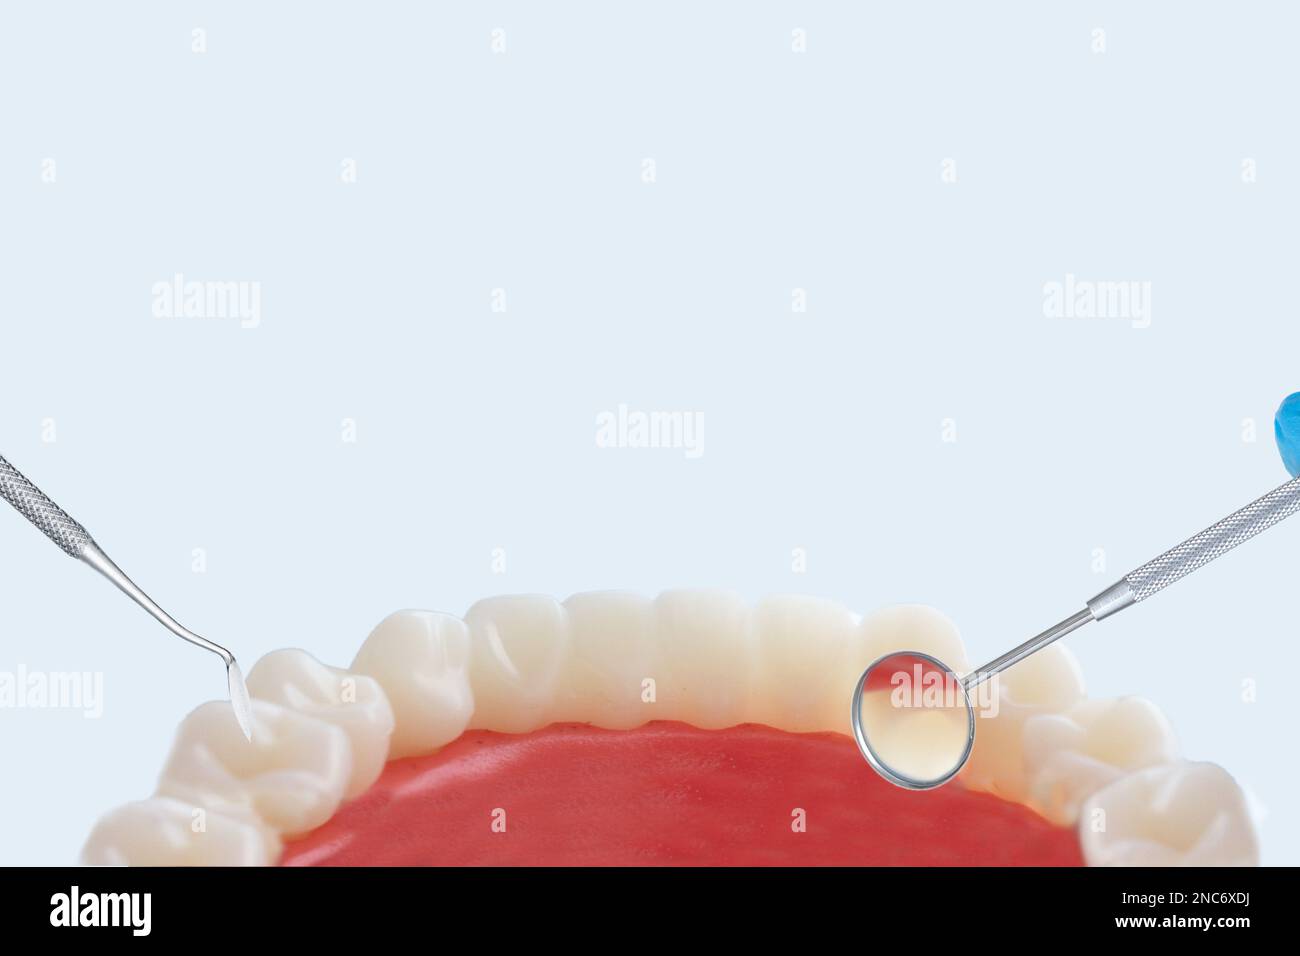 Shot from mouth. View from inside the dental jaw. Teethcare, dental health concept Stock Photo